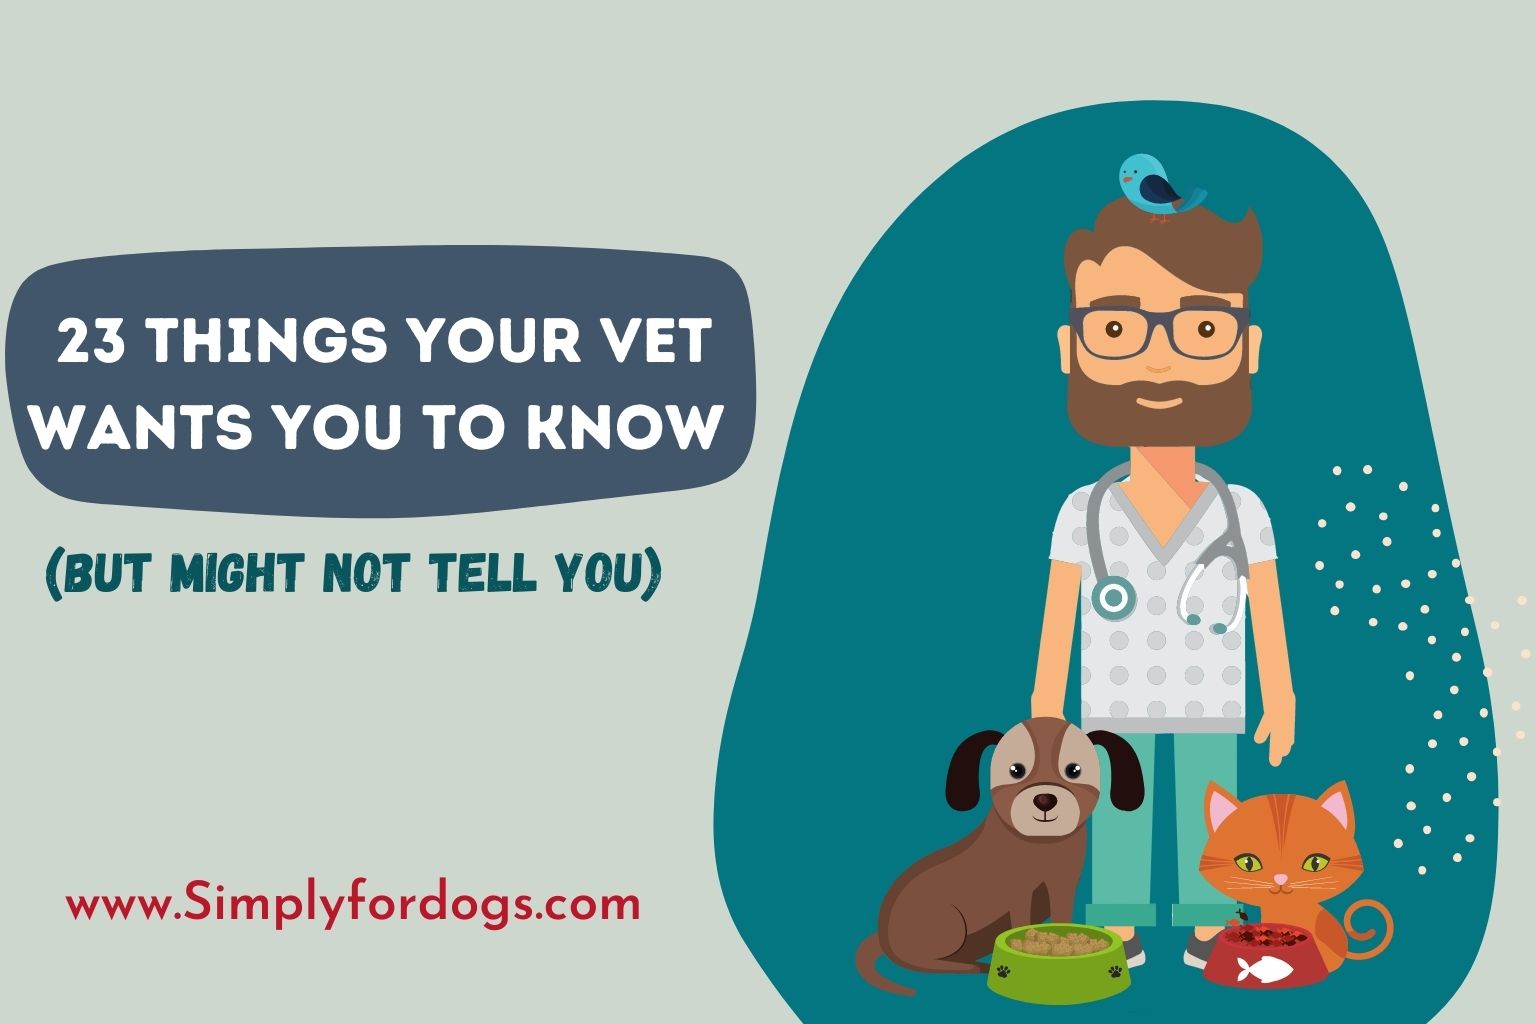 23 Things Your Vet Wants You to Know (But Might Not Tell You)